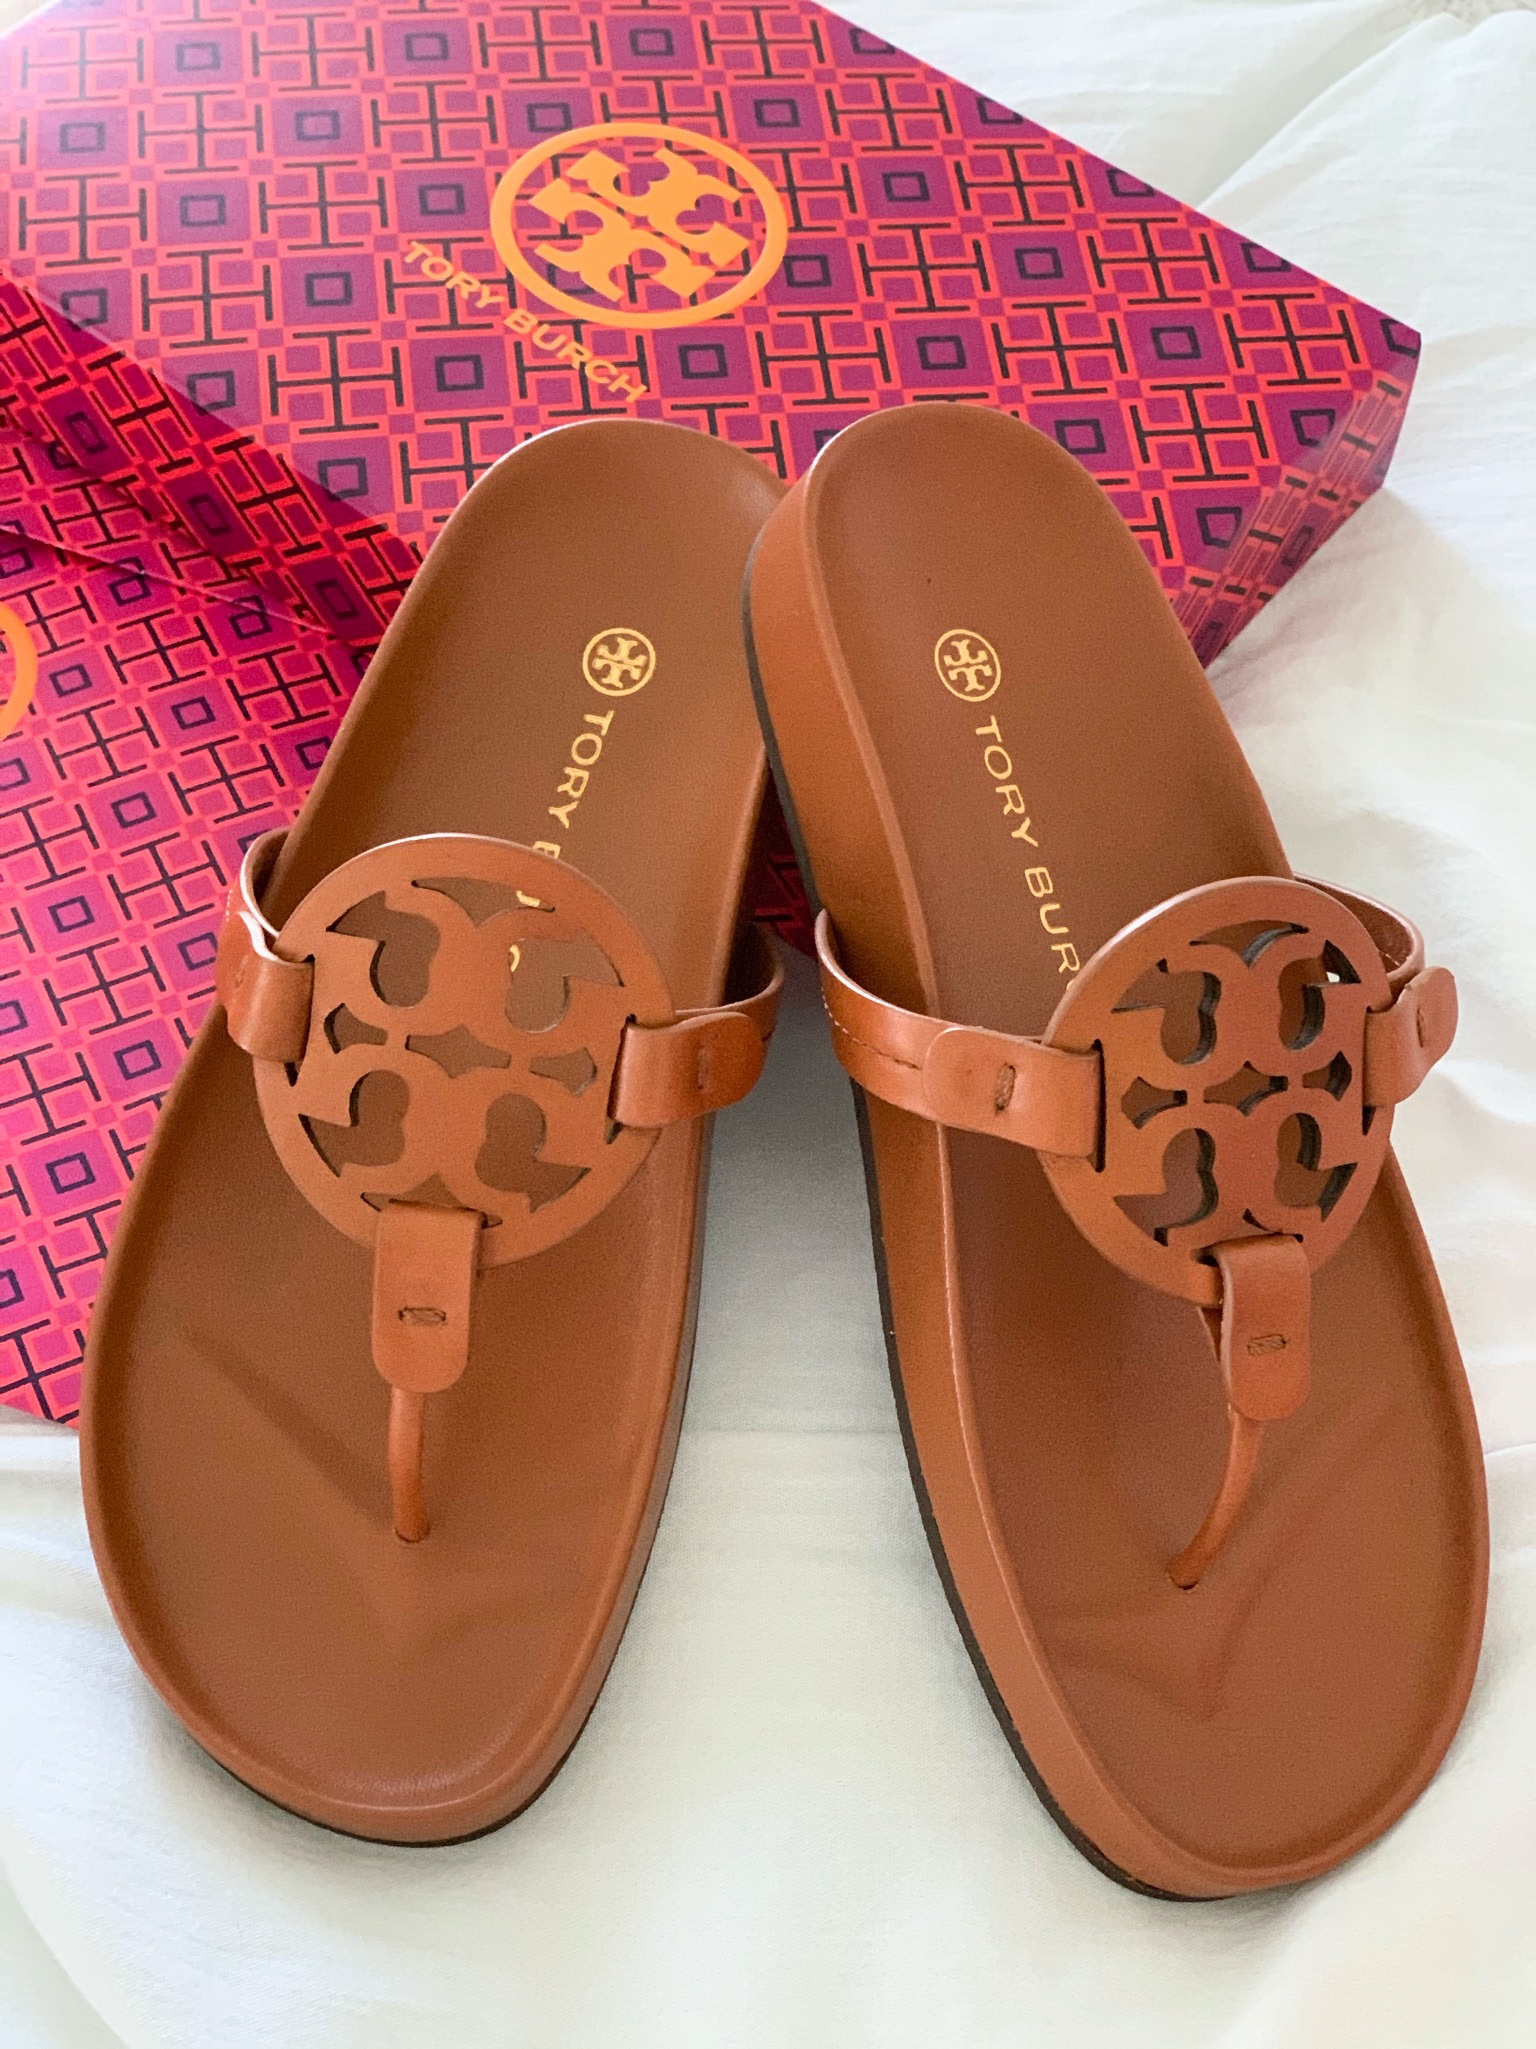 tory burch shoes sandals